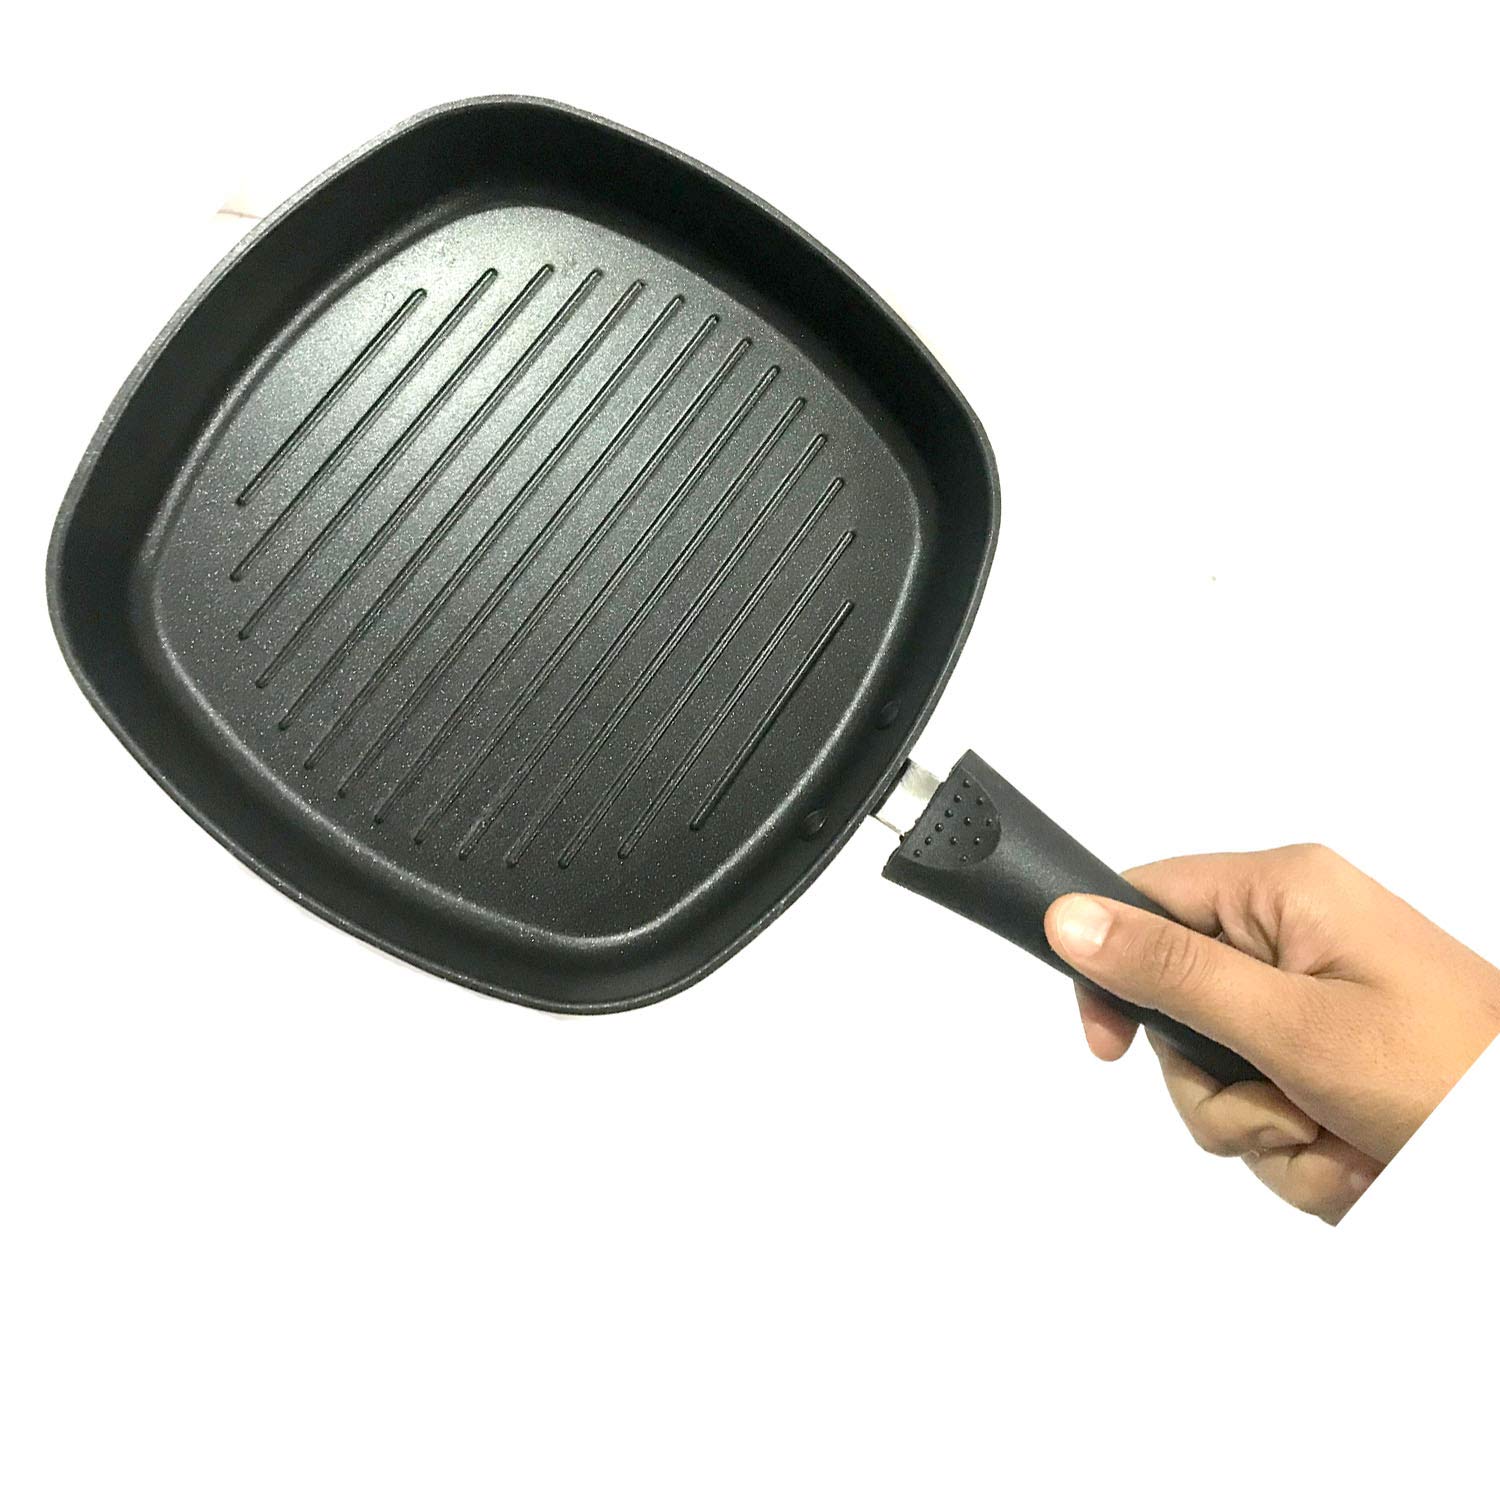 DBY Grill Pan Gas Stove Top Nonstick Square Perfect for Meat Steak Fish And Vegetables Grilled Cookware Non Stick Coating Indoor and Outdoor Use for Grilling Frying Sauteing 9 inches